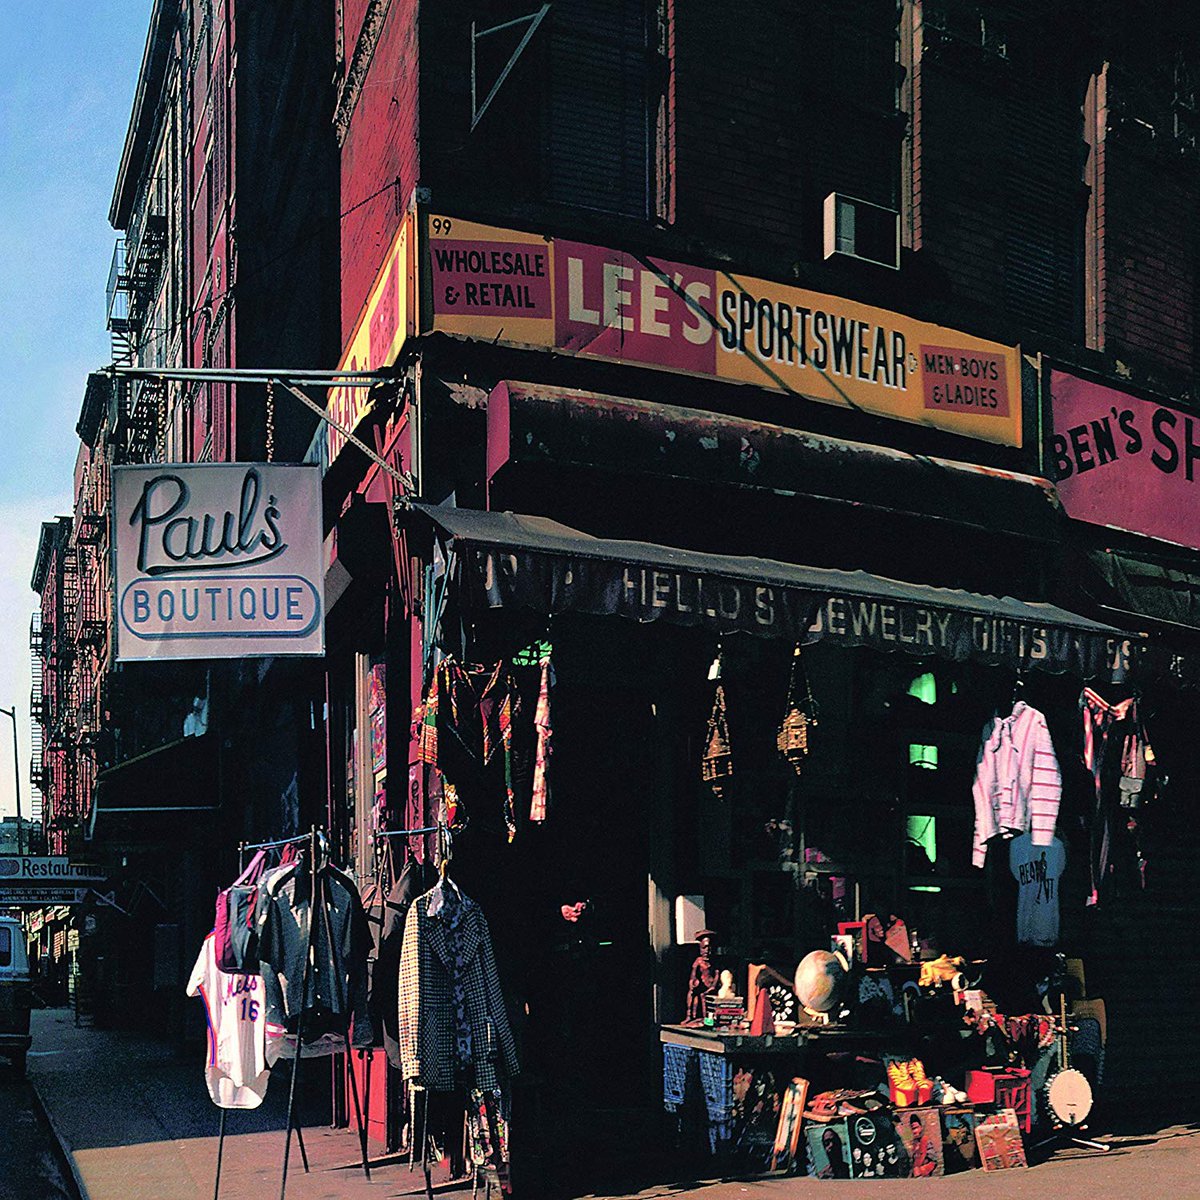 Beastie Boys Debut: Licensed to I'll2nd: Paul's Boutique